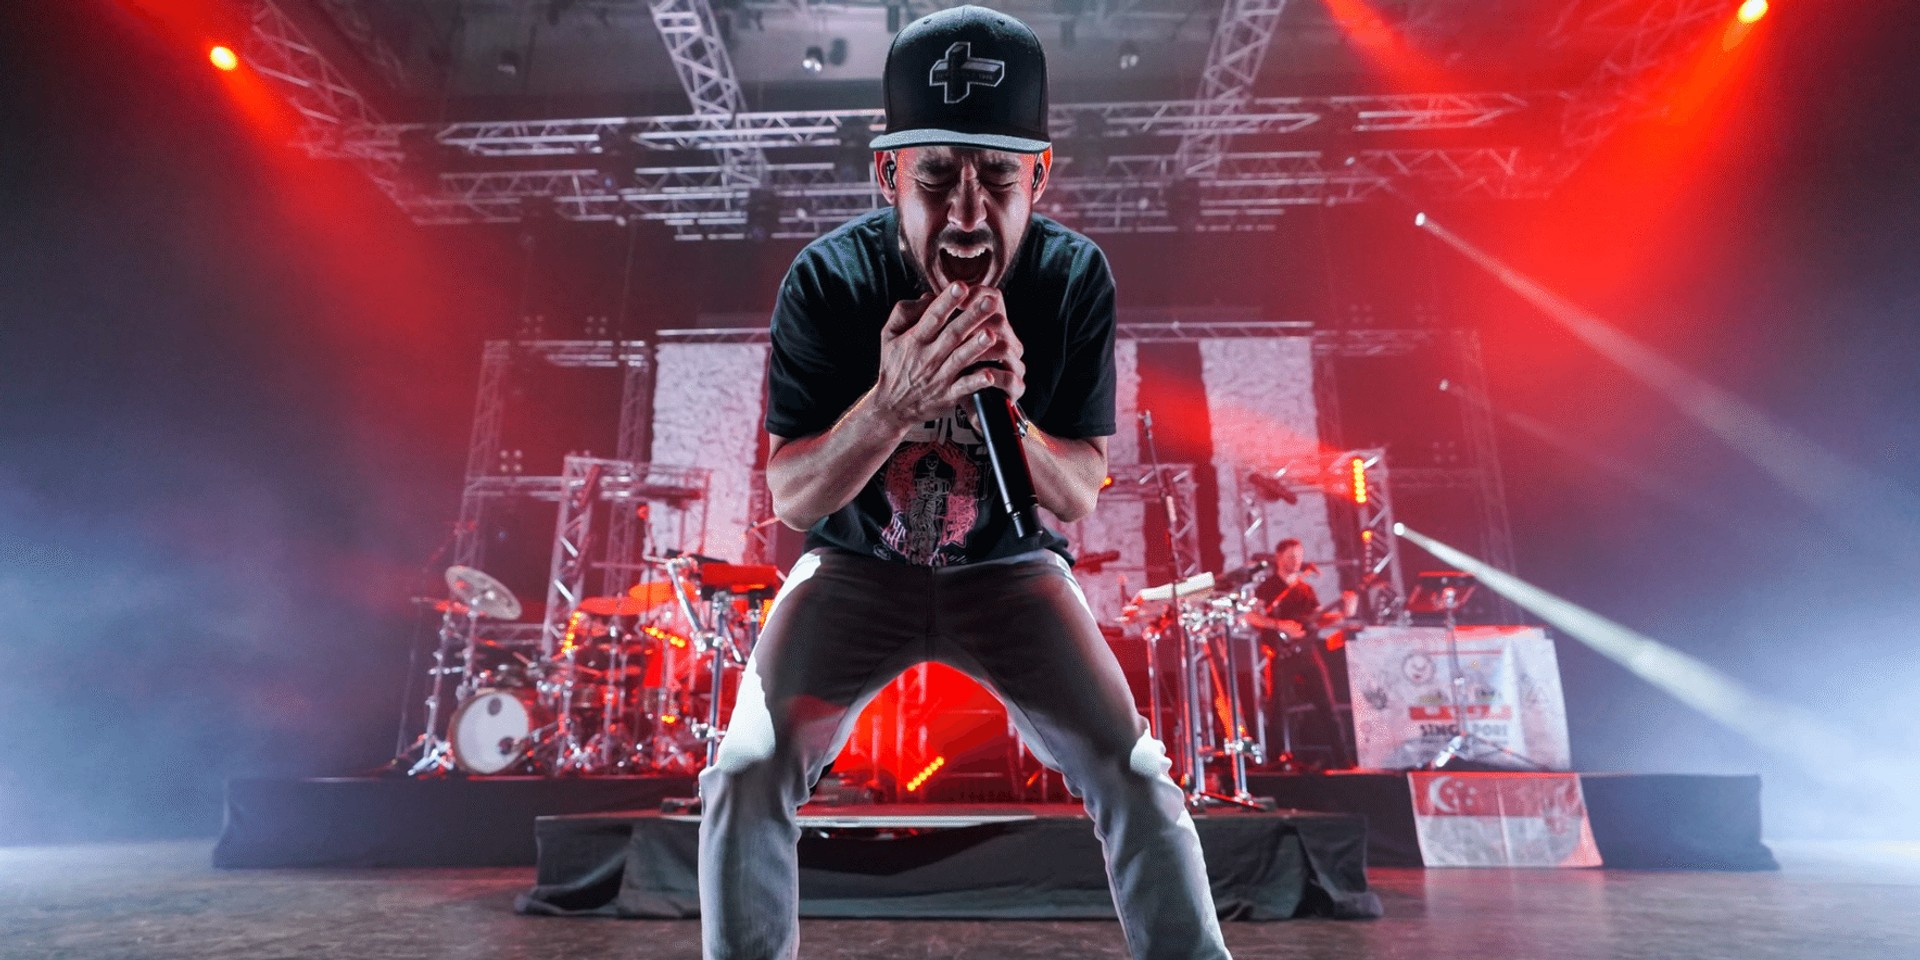 Mike Shinoda to perform in Jakarta this September